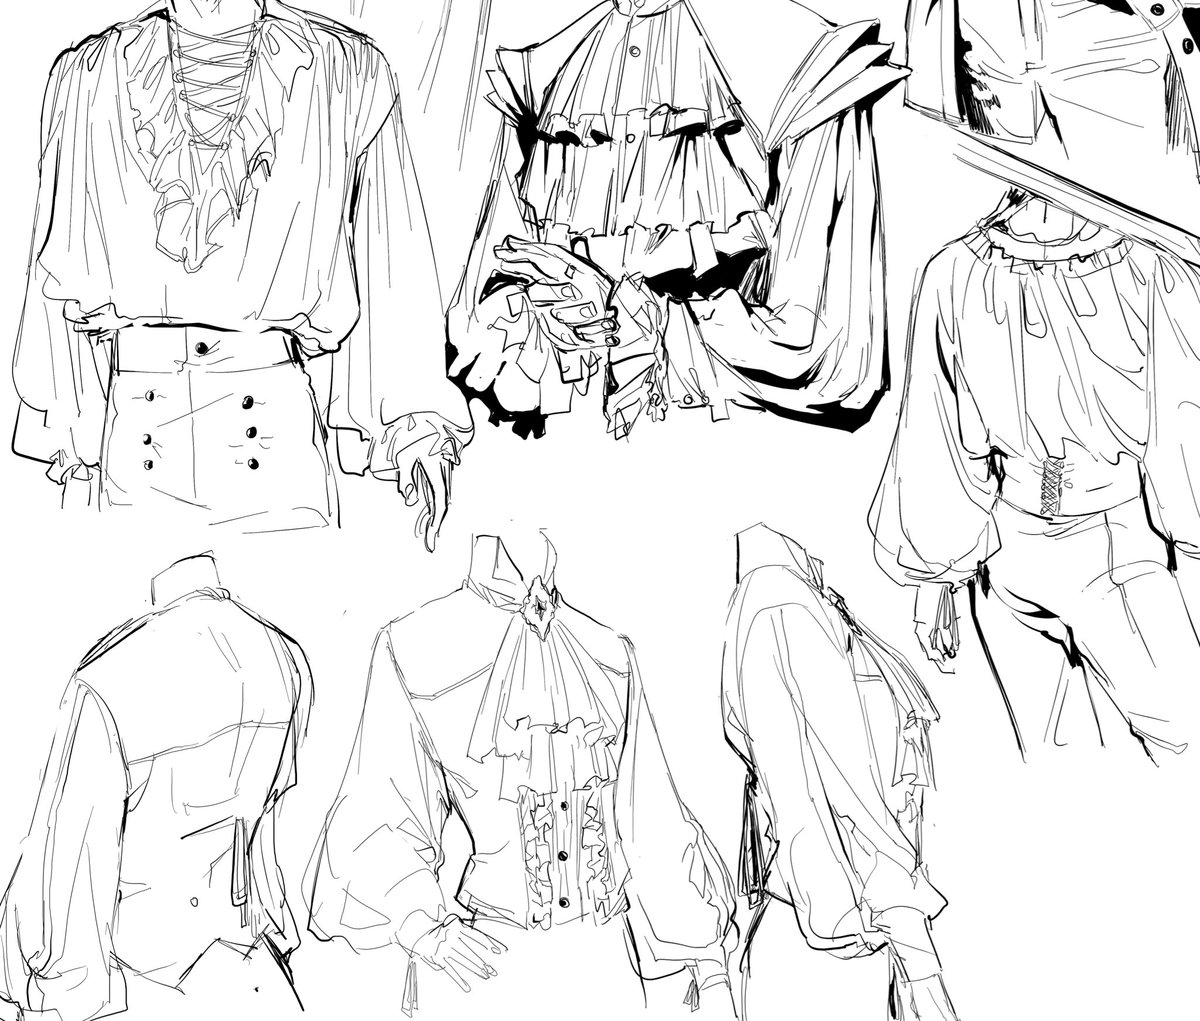 Why don't I draw ye olde clothing more  often it's so fun 